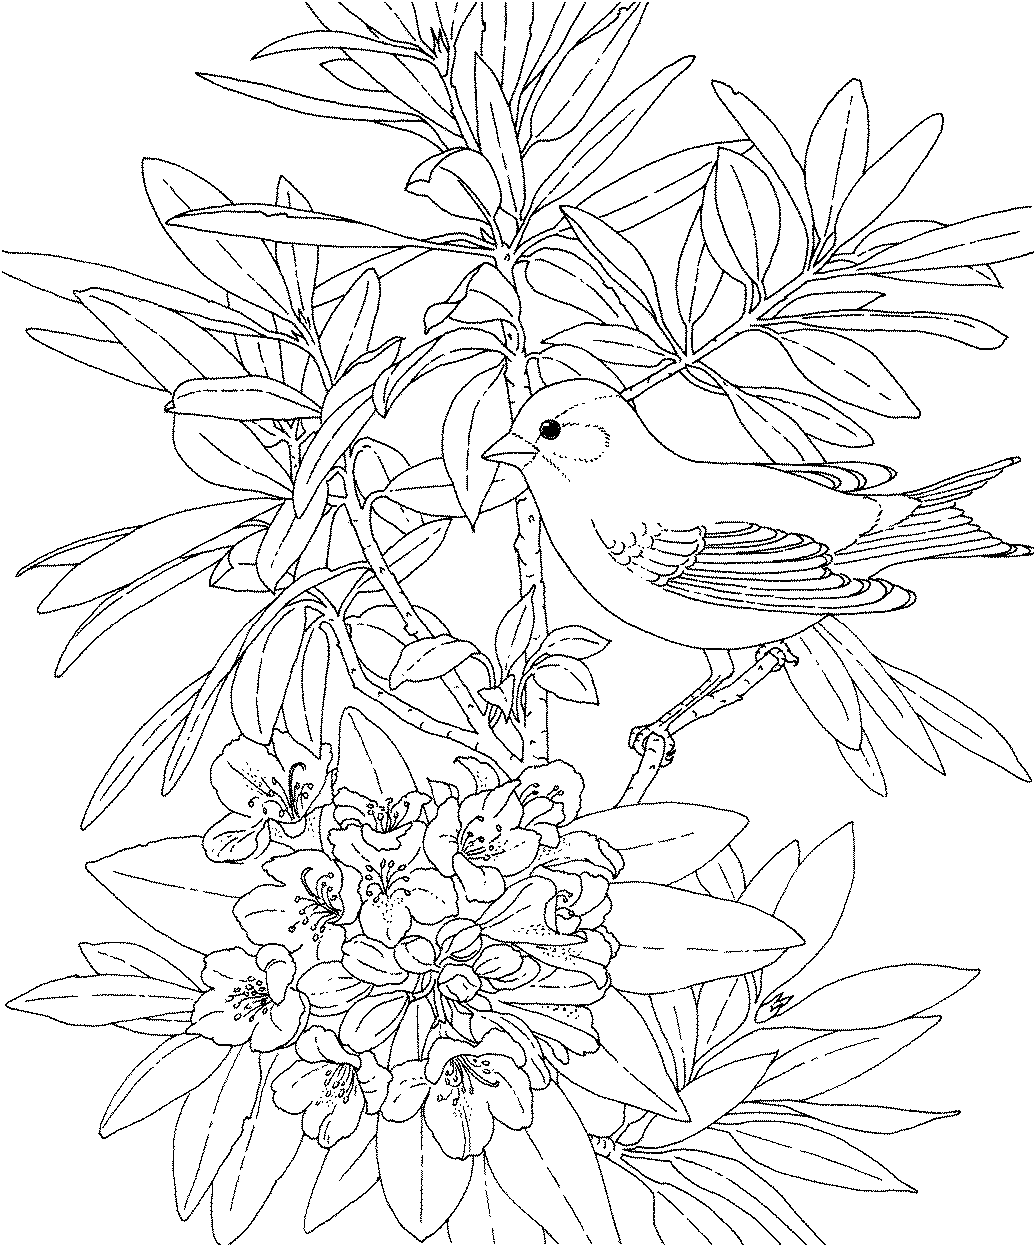  Bird And Flower Coloring Pages Printable Free